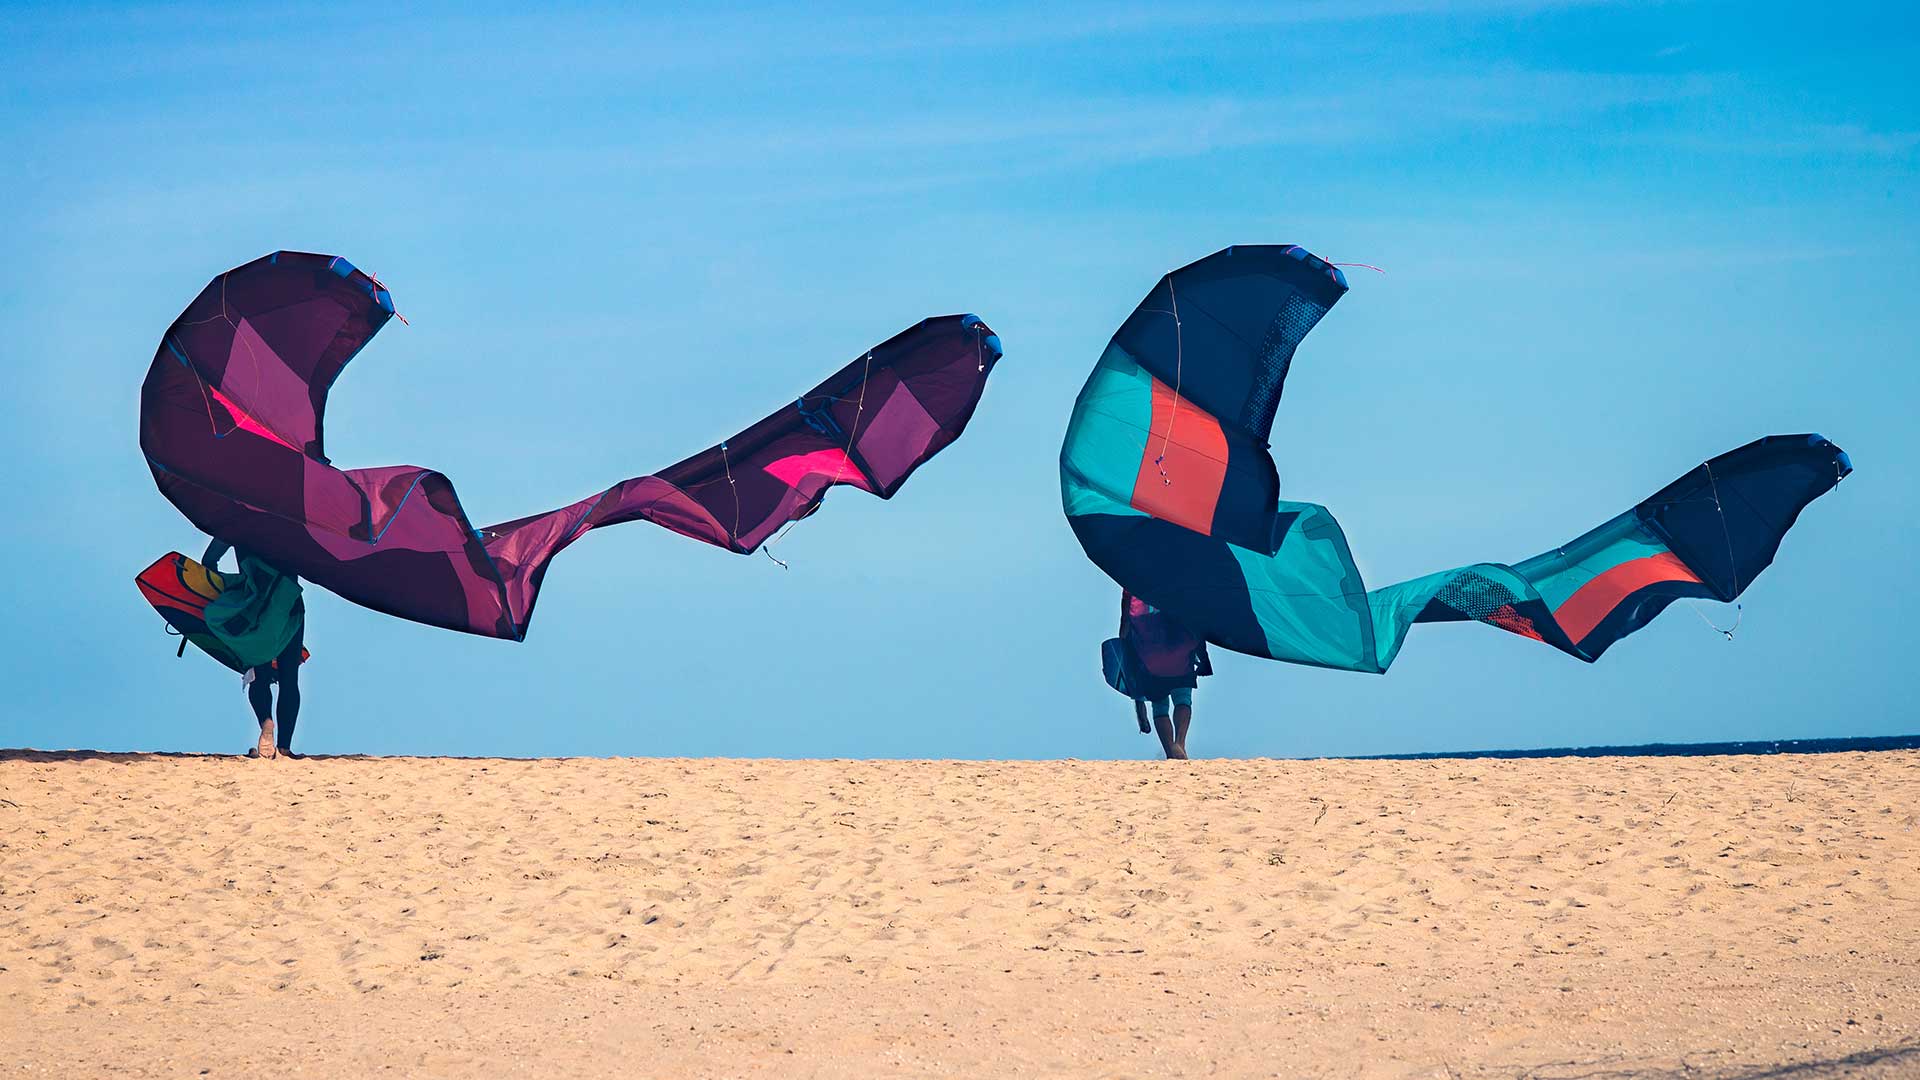 Two friends on a beach with big butterfly wing kites